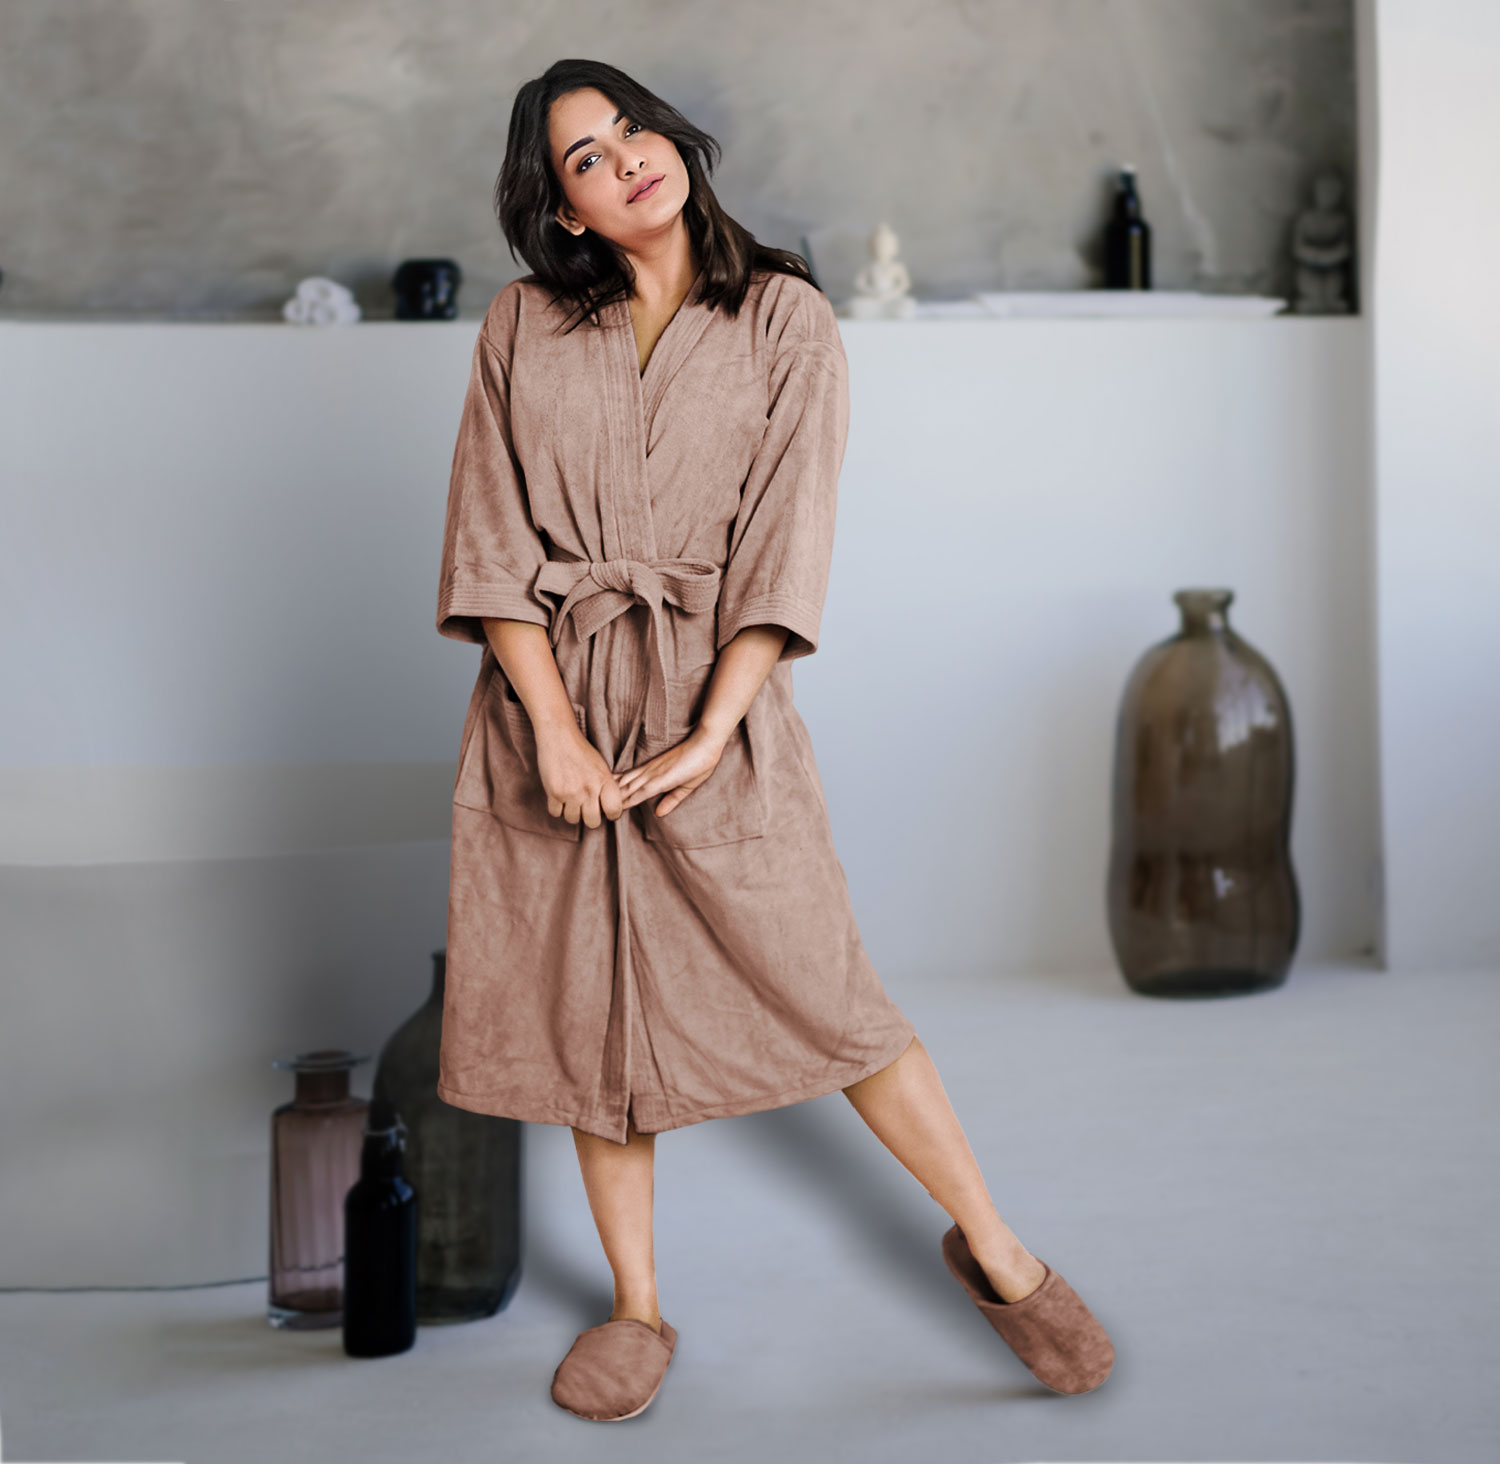 Women's Robes, Bath Robes, Dressing Gowns